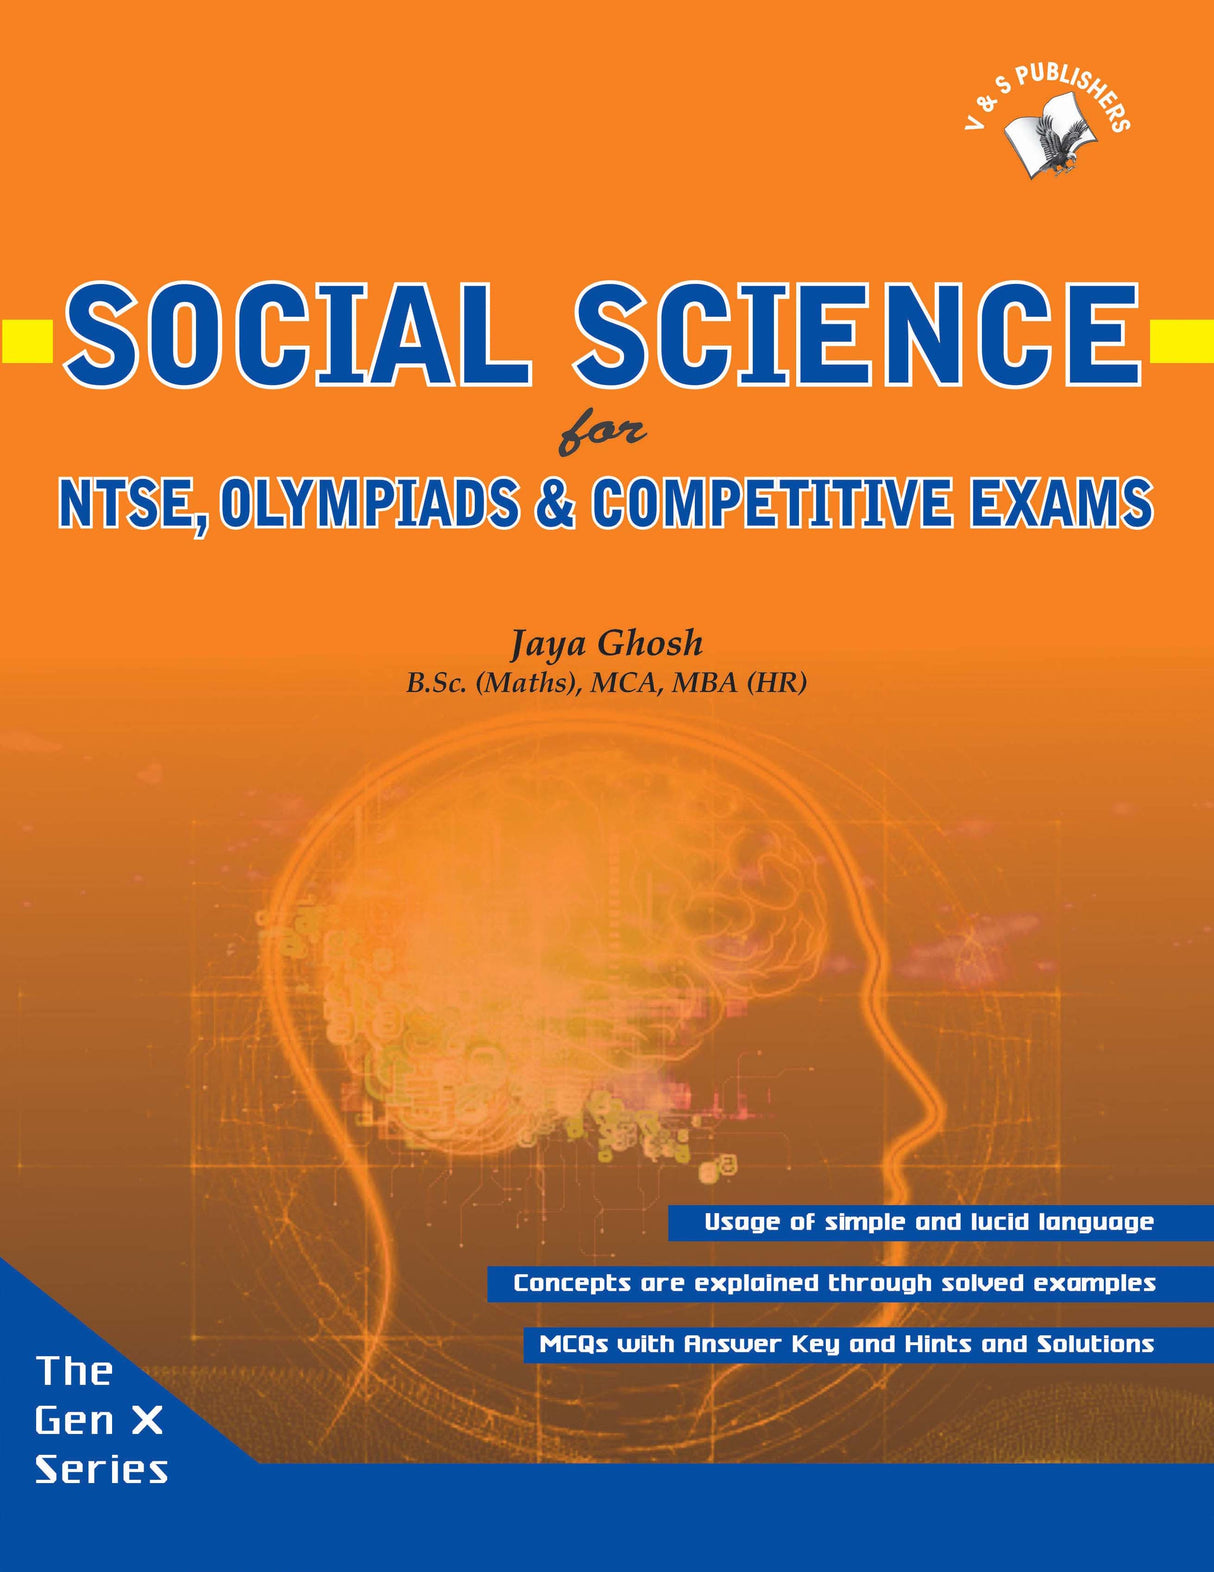 Social Science: For NTSE, olympiads & competitive exams